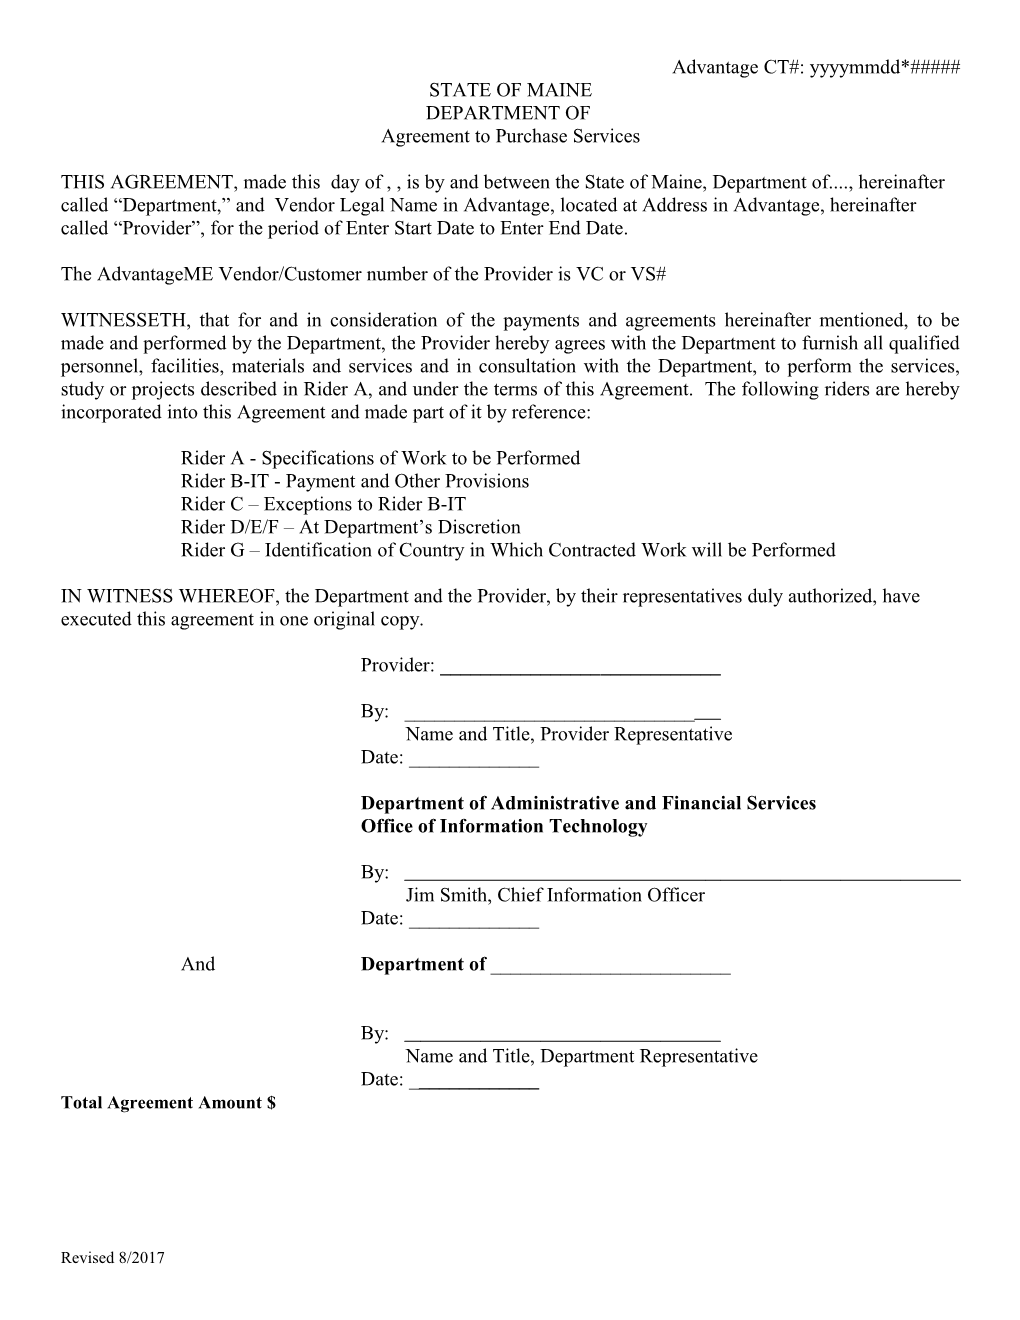 Agreement to Purchase Services (Bp54-It)